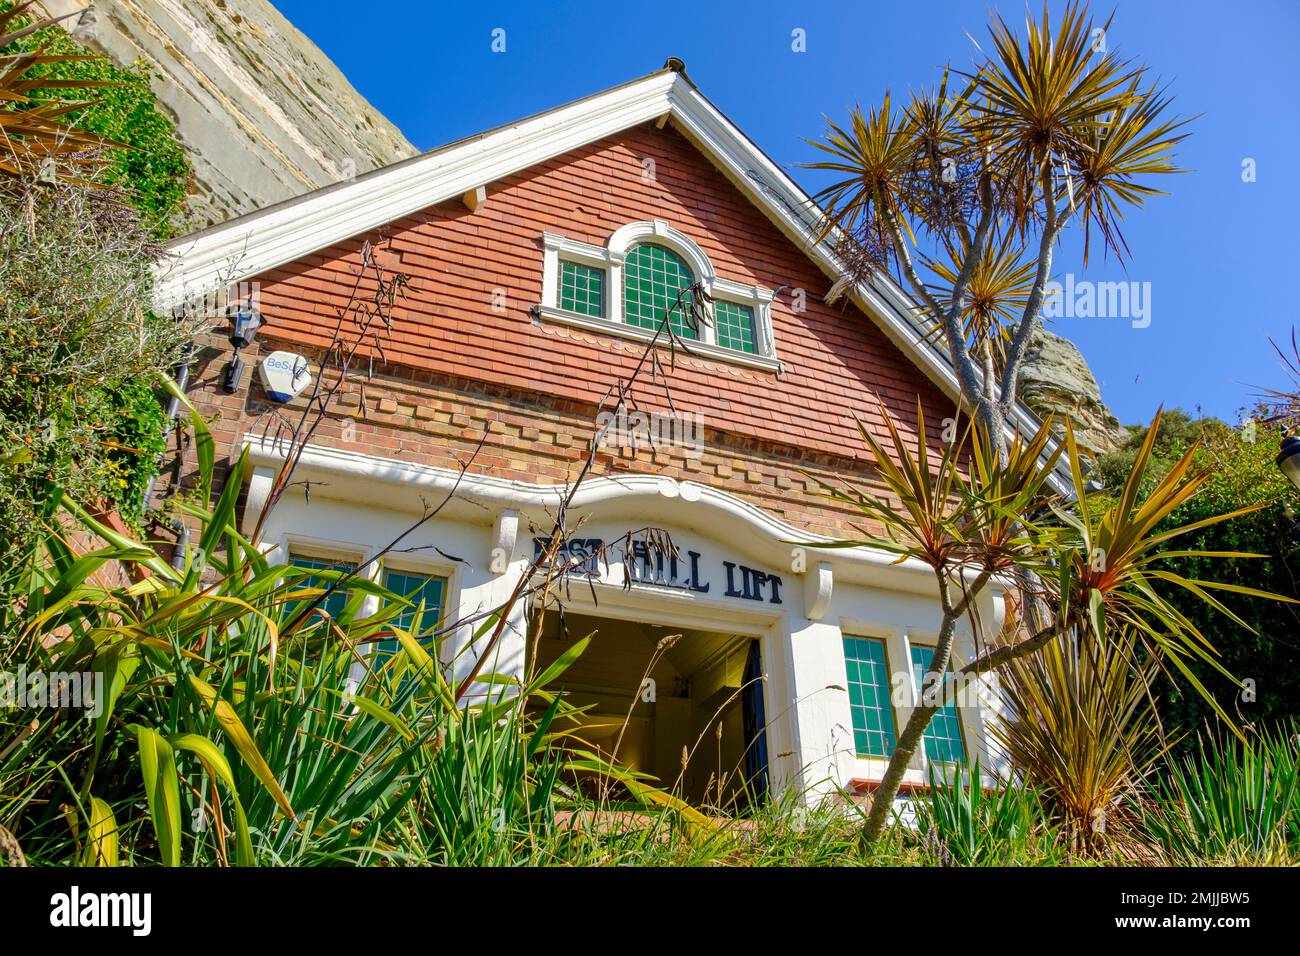 Hastings, East Hill Cliff Lift, East Sussex, Regno Unito Foto Stock